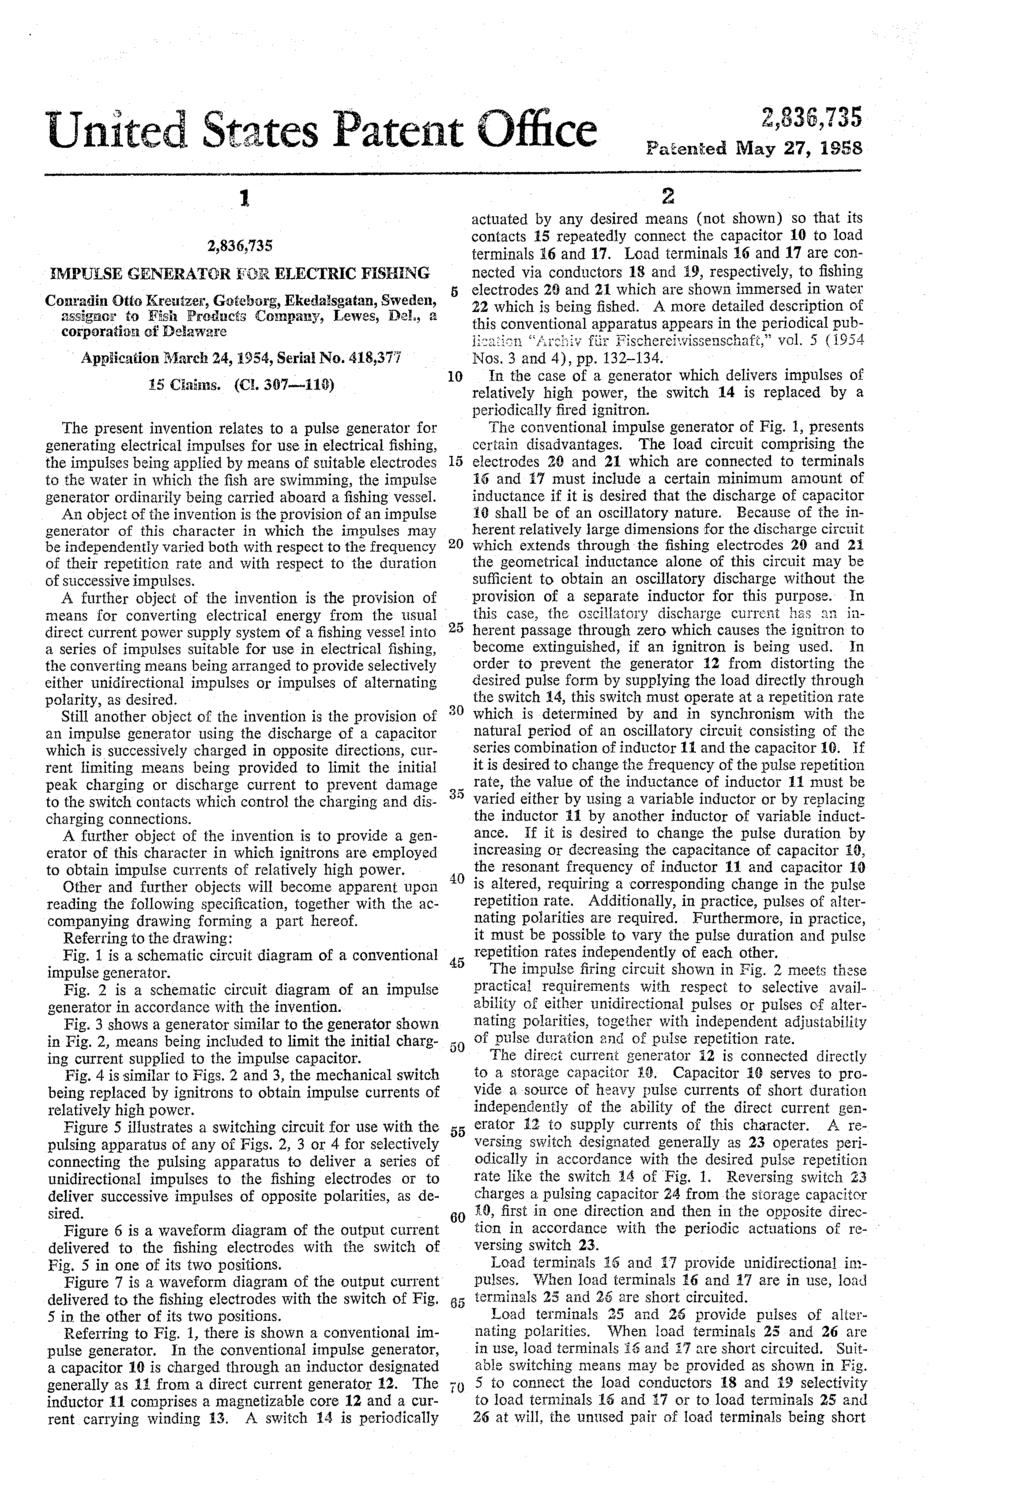 United States Patent Office Patenied May 27, 1958 MPULSE GENERATOR BRELECTRC FSHING Conradin Otto Kretzer, Goteborg, Ekedalsgatan, Sweden, assignor to Fish Products Company, Lewes, Del, a corporation